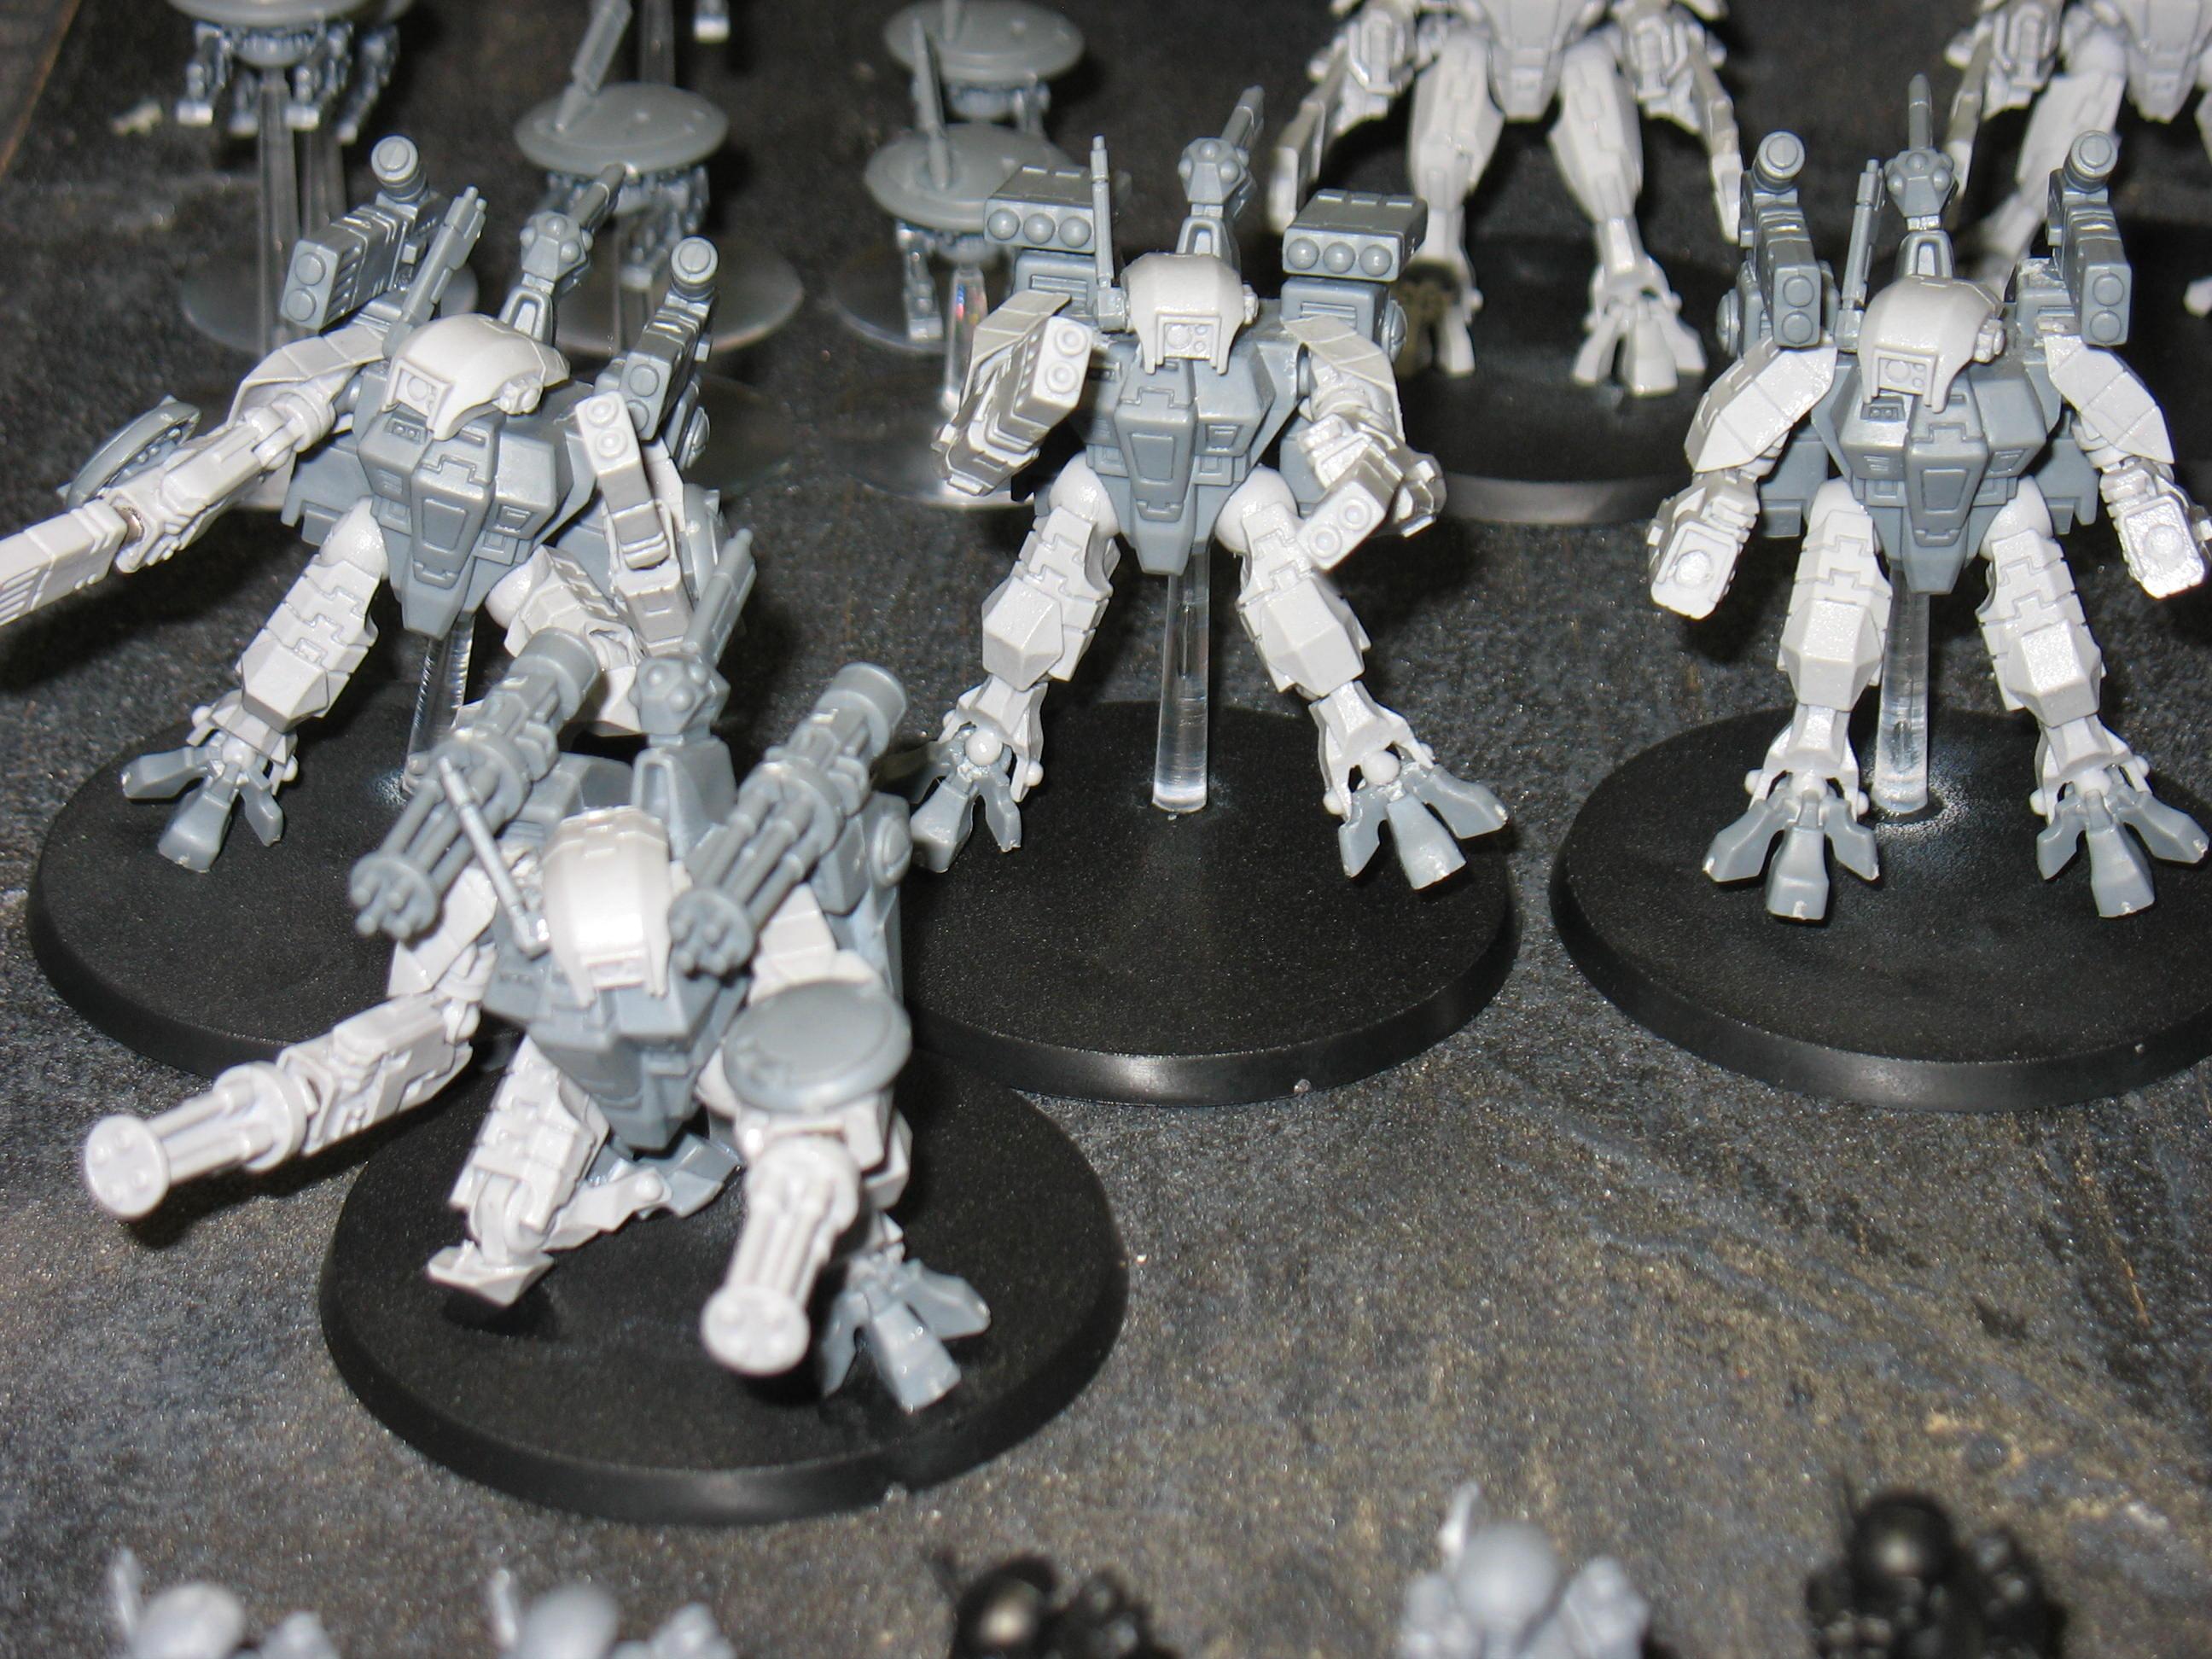 some crisi suits (all magnetized!!)